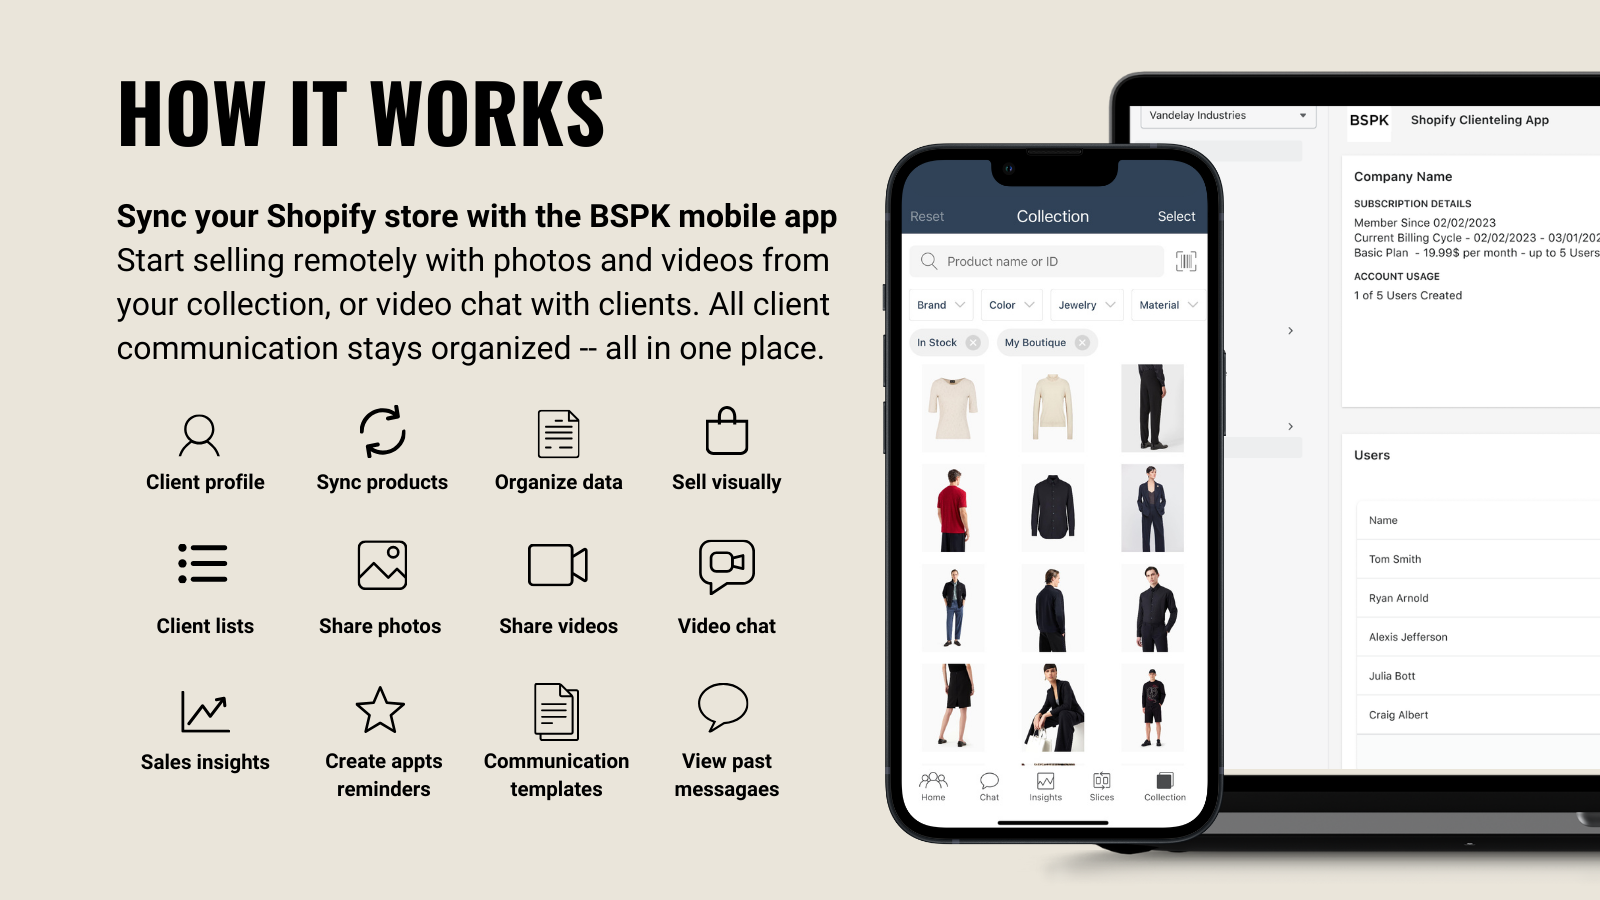 Sync your Shopify Collection to BSPK